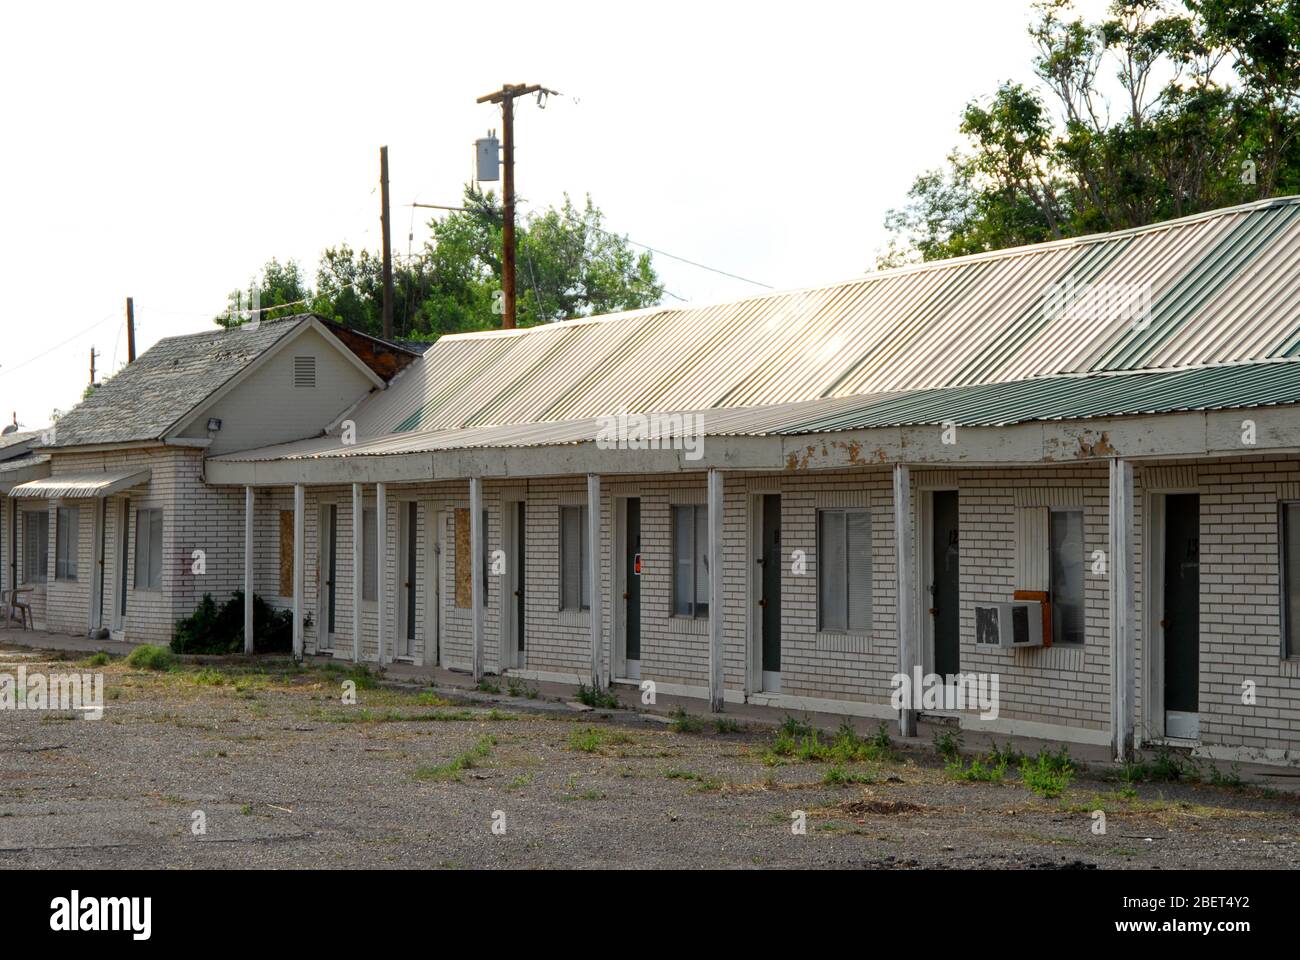 GREEN RIVER, UT/USA - JULY 10, 2012: The remains of an old abandoned roadside motel in southern Utah Stock Photo